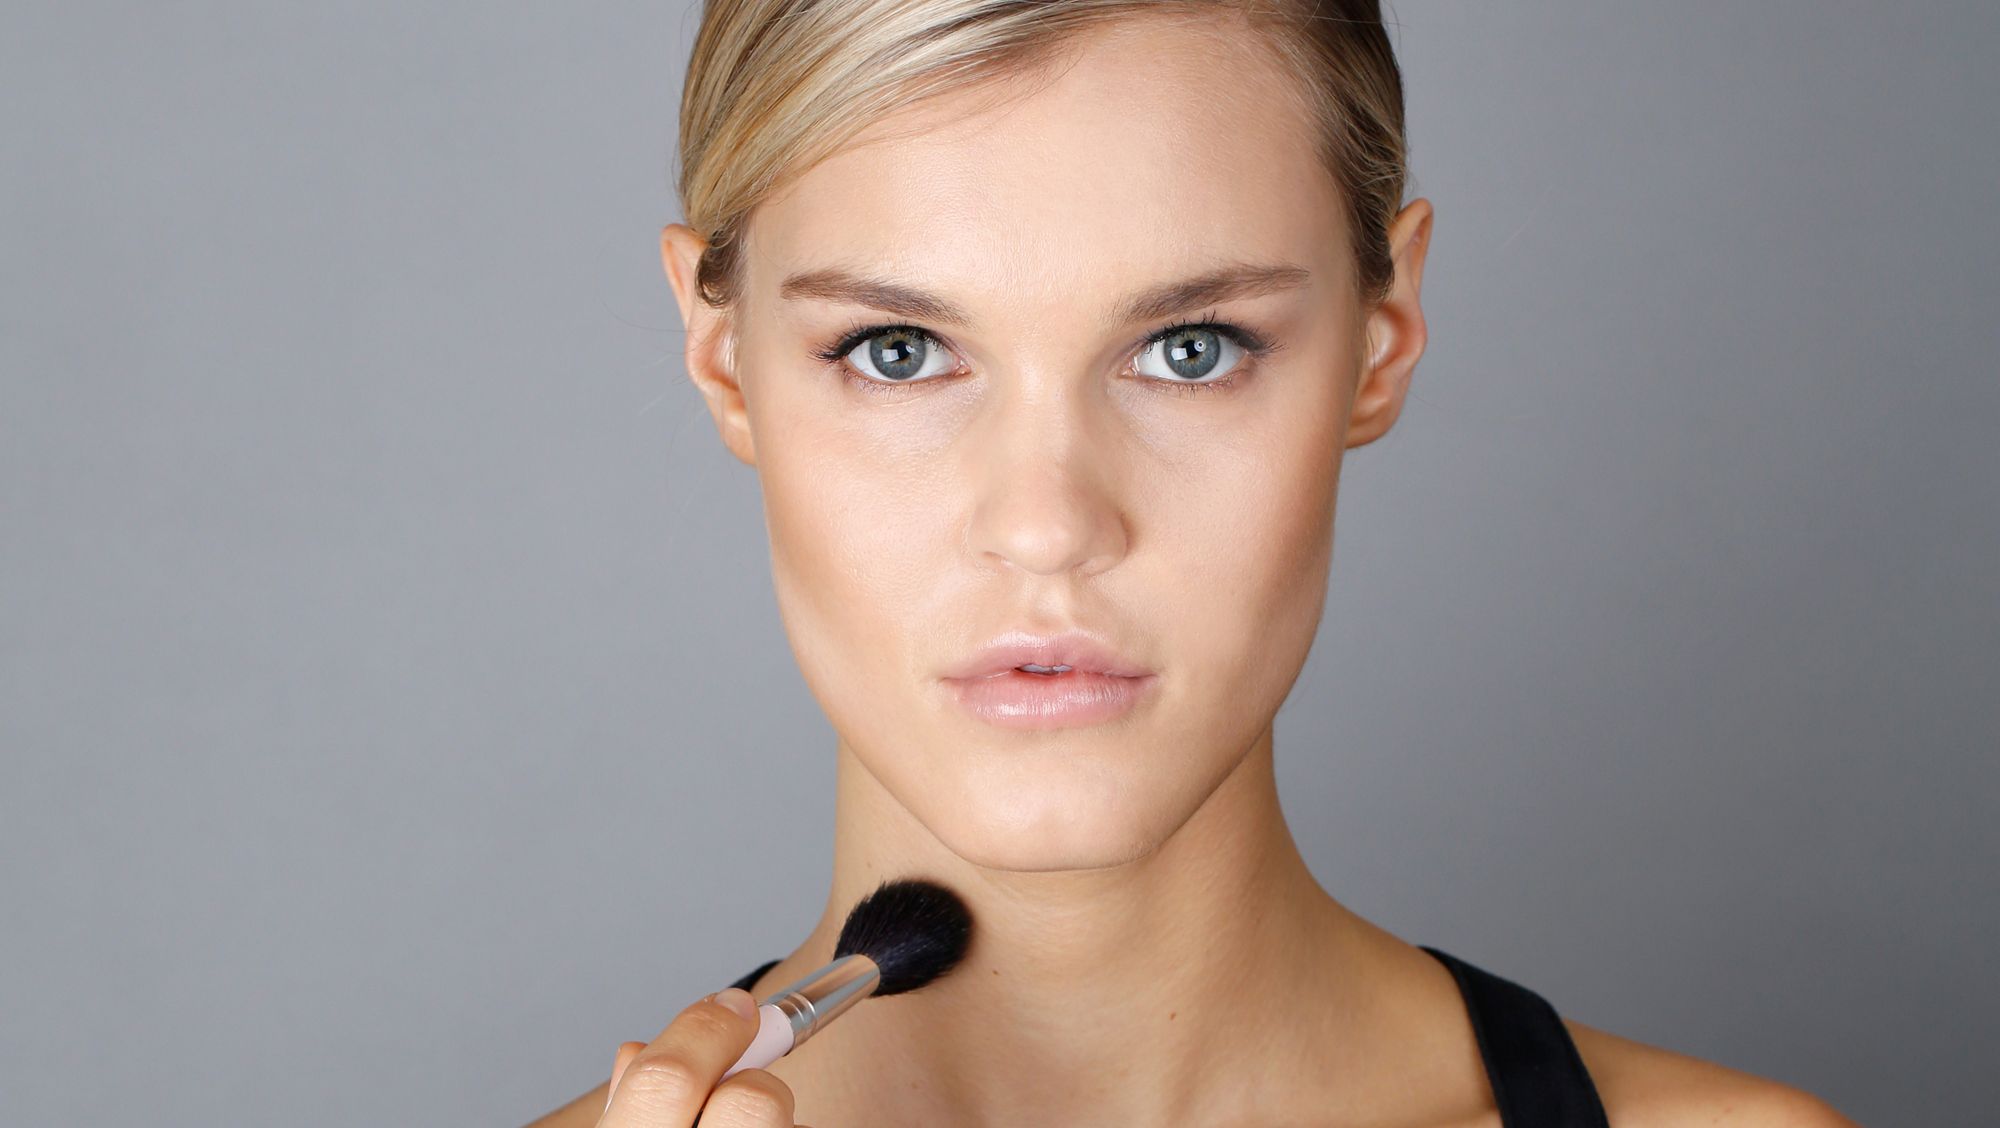 How to use contour make-up: Your complete guide to face contouring